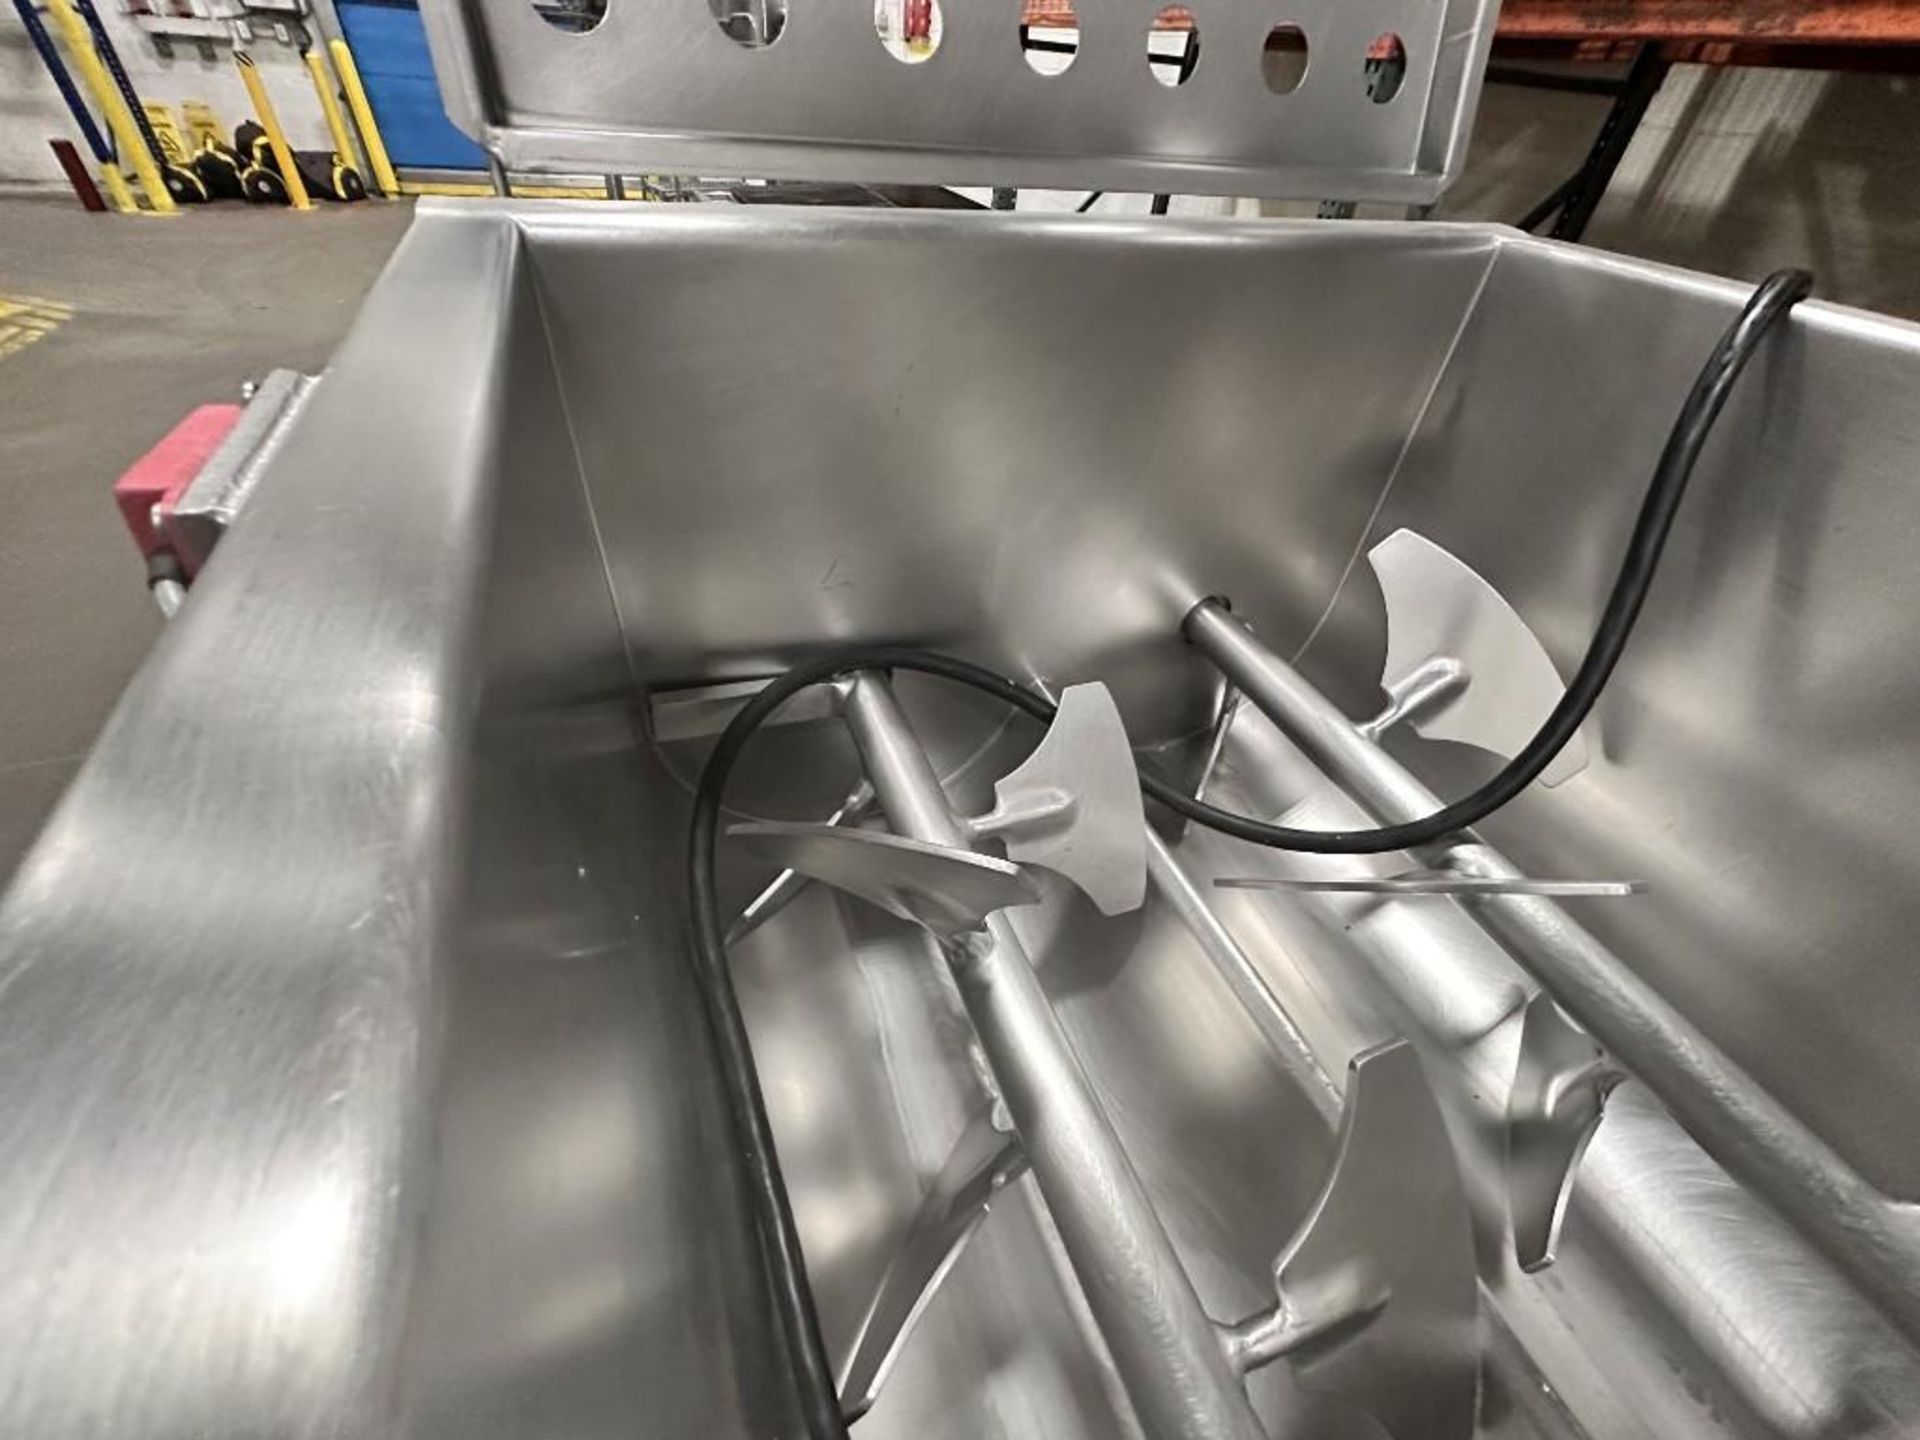 A.M.F.E.C MODEL 510 DUAL SHAFT PADDLE MIXER ALL STAINLESS STEEL, CONTROLS - Image 6 of 10